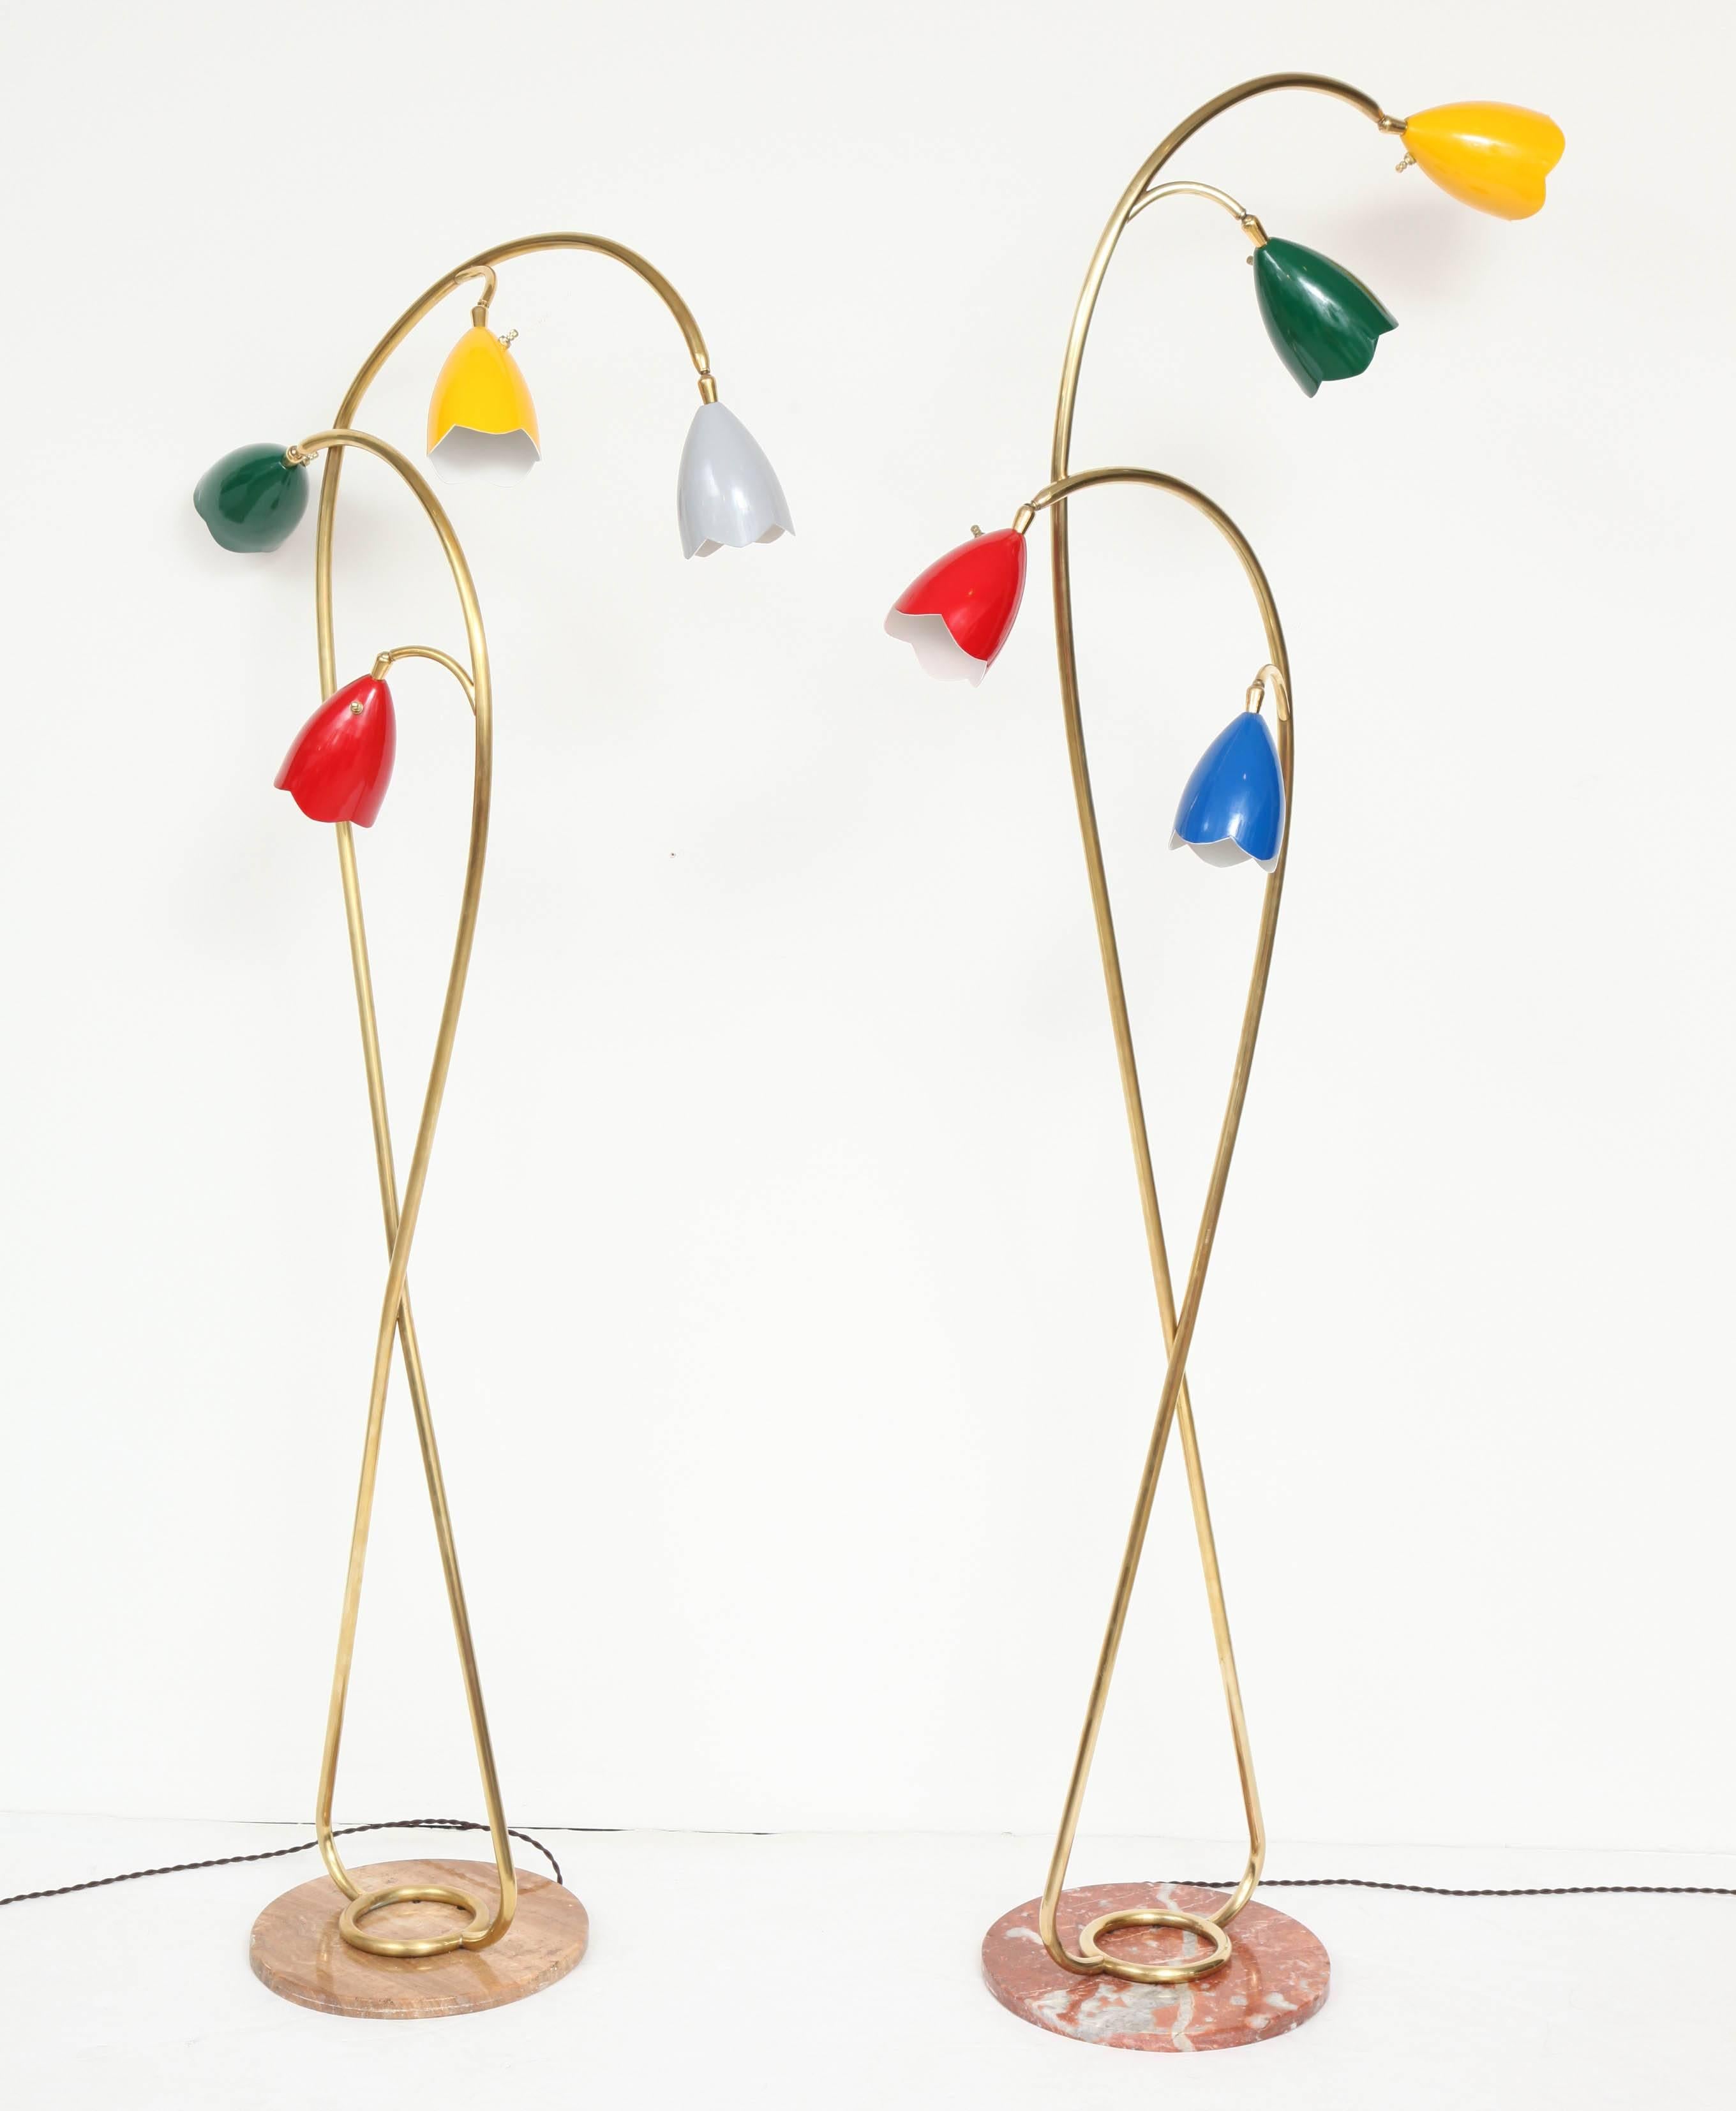 Striking and unusual pair of vintage Italian floor lamps from the late 1950s. Attributed to Arredoluce Monza. Double brass scrolling tendrils reach up from their round polished onyx bases like glorious florae. Distinctive Arredoluce flower shaped